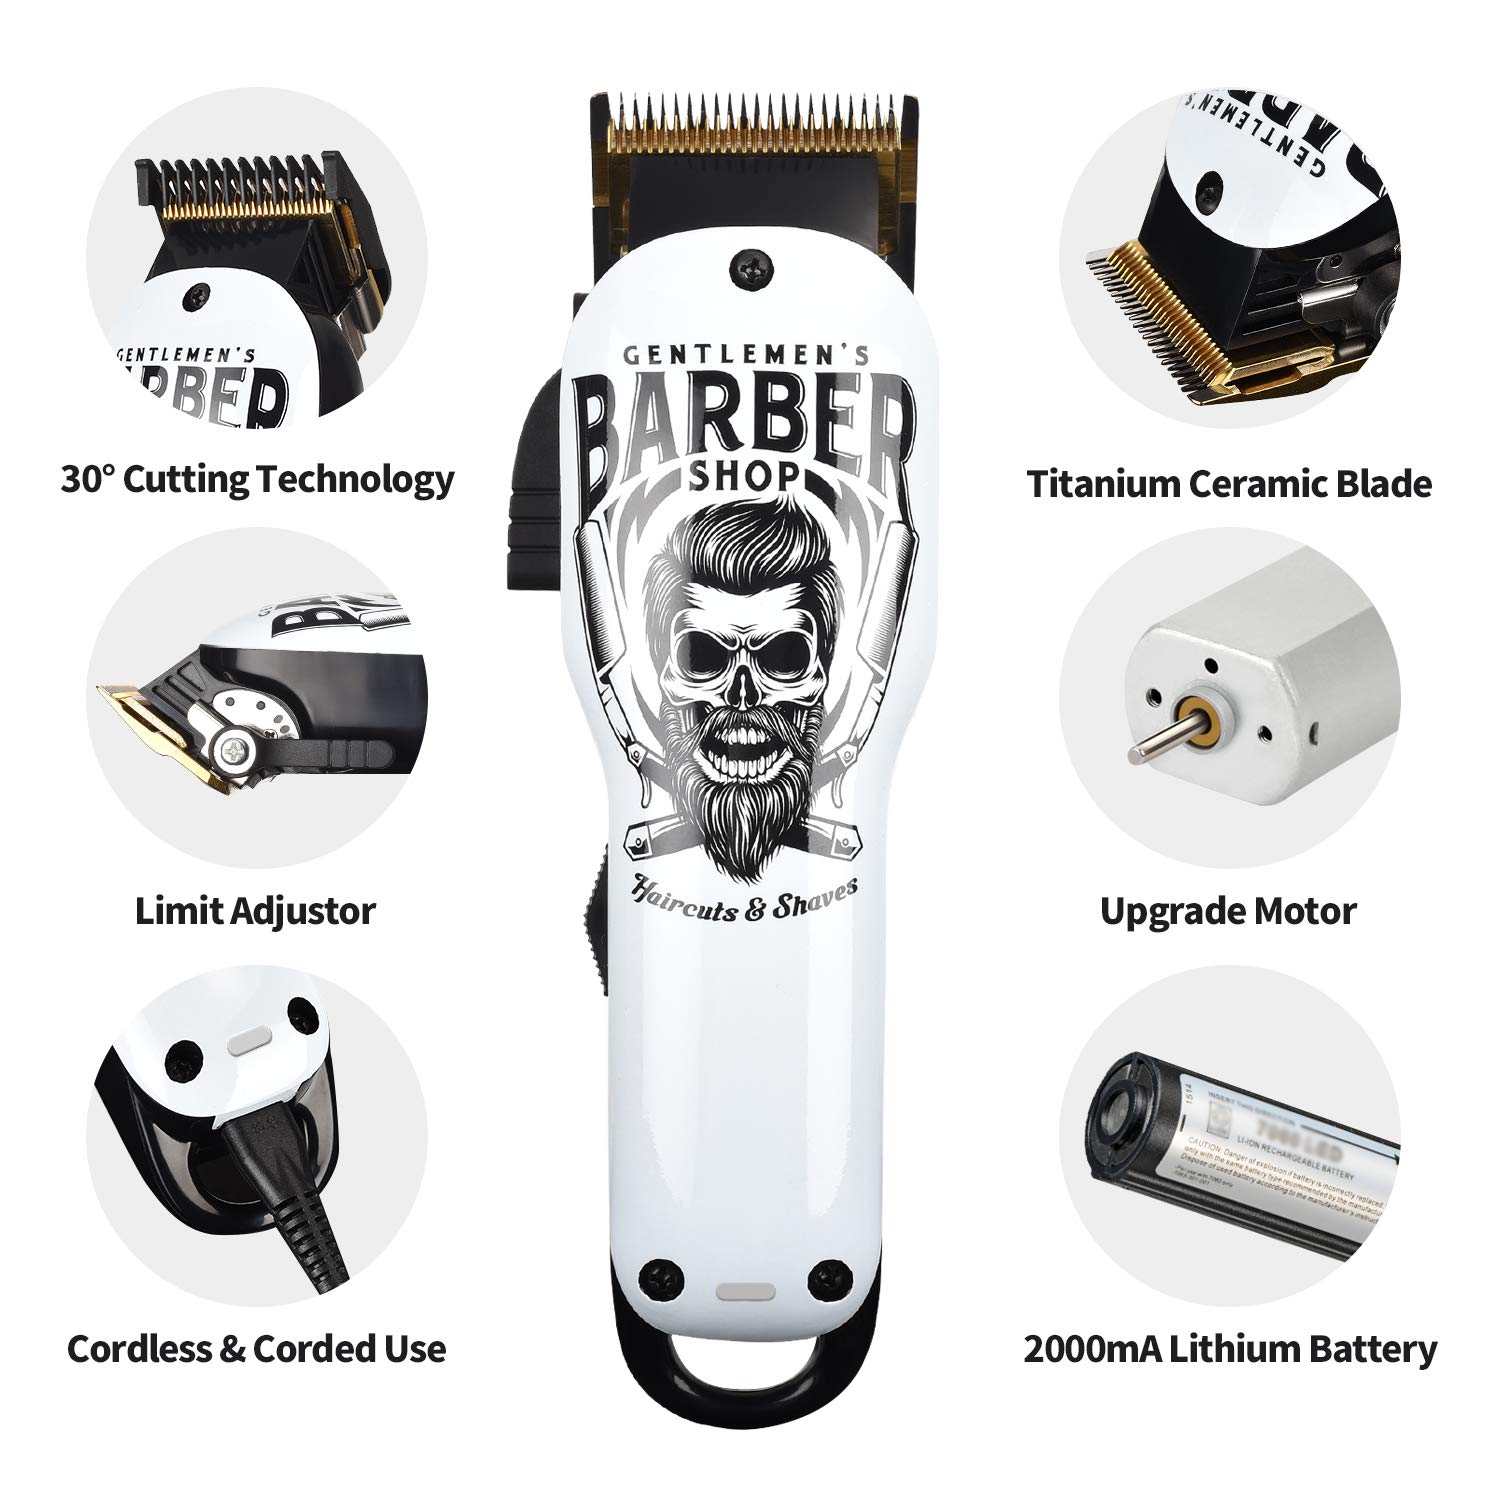 /professional-cordless-haircut-kit-rechargeable-2000mah-with-6-guide-combs.html